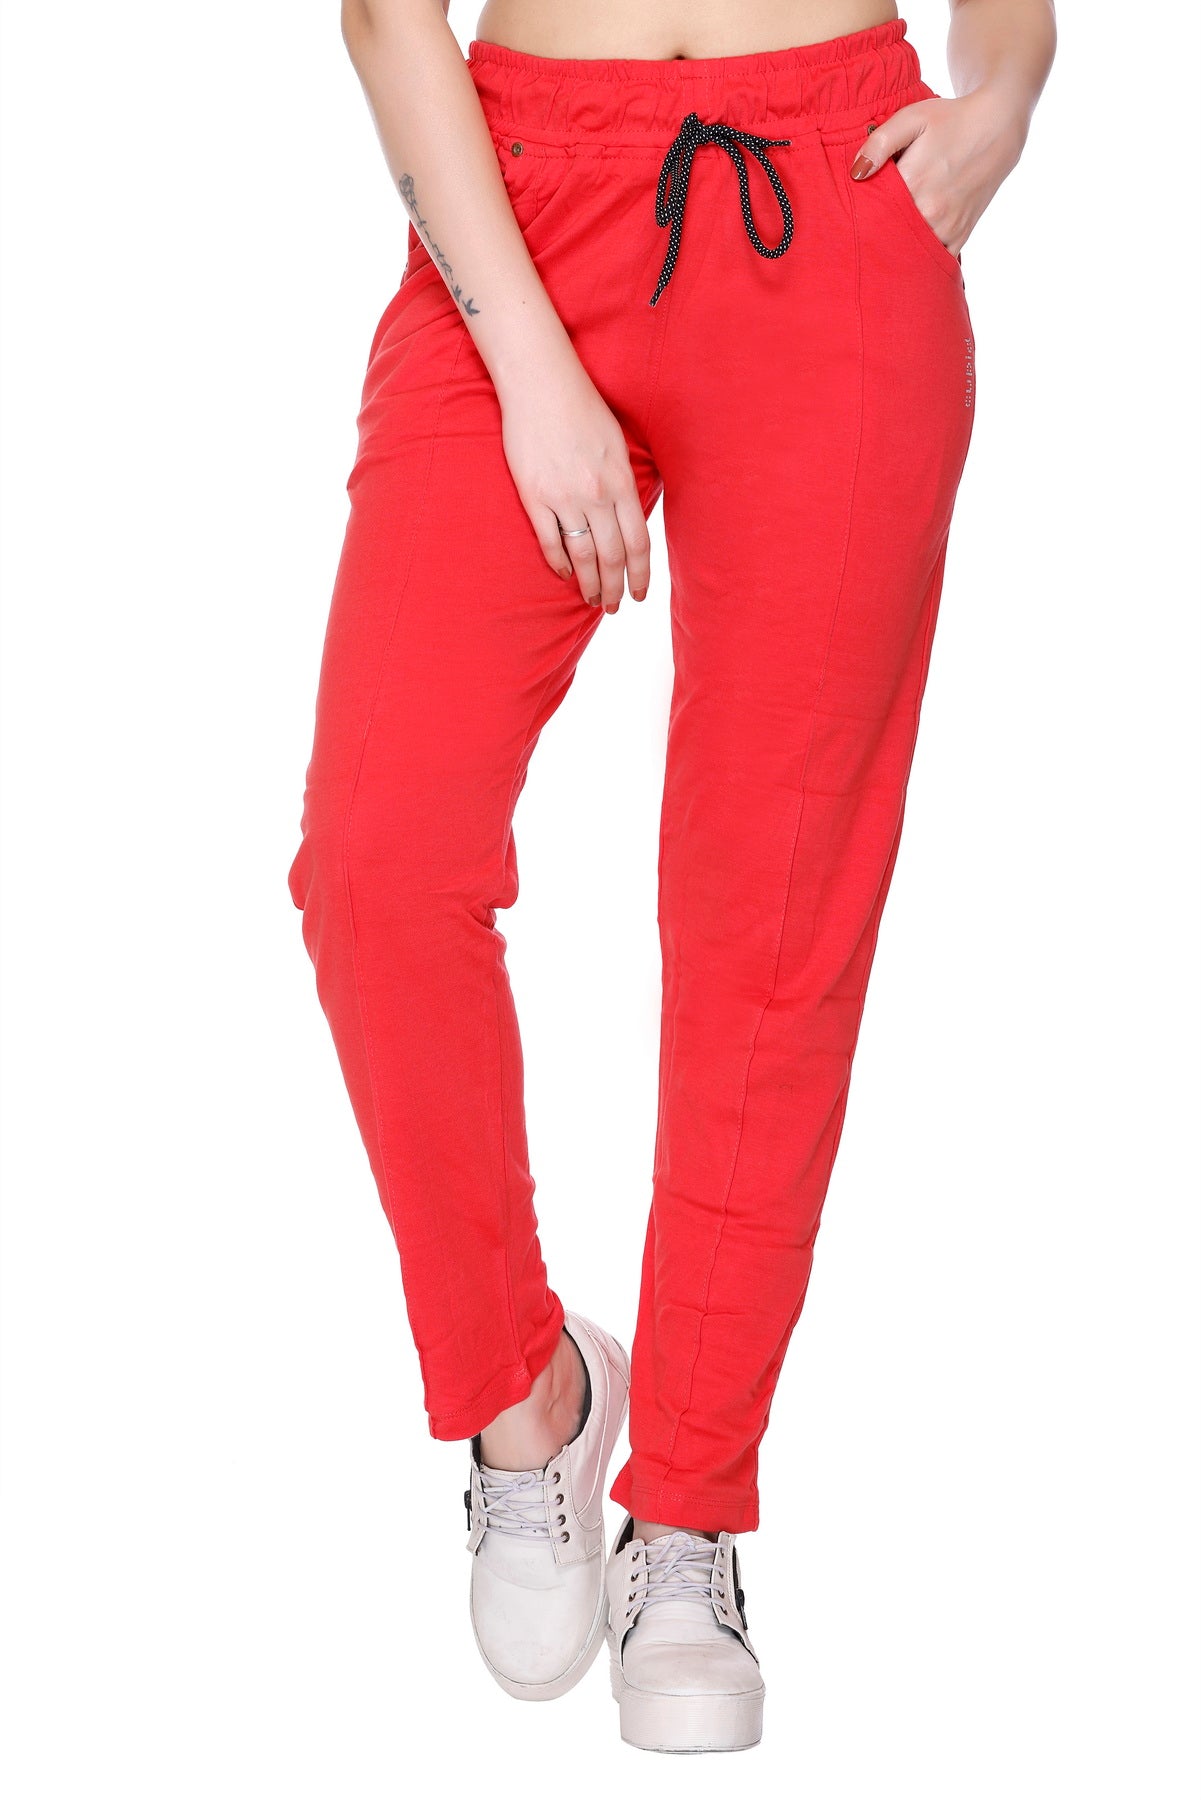 Ladies Continental Overall Trouser - Red | Sweet-Orr